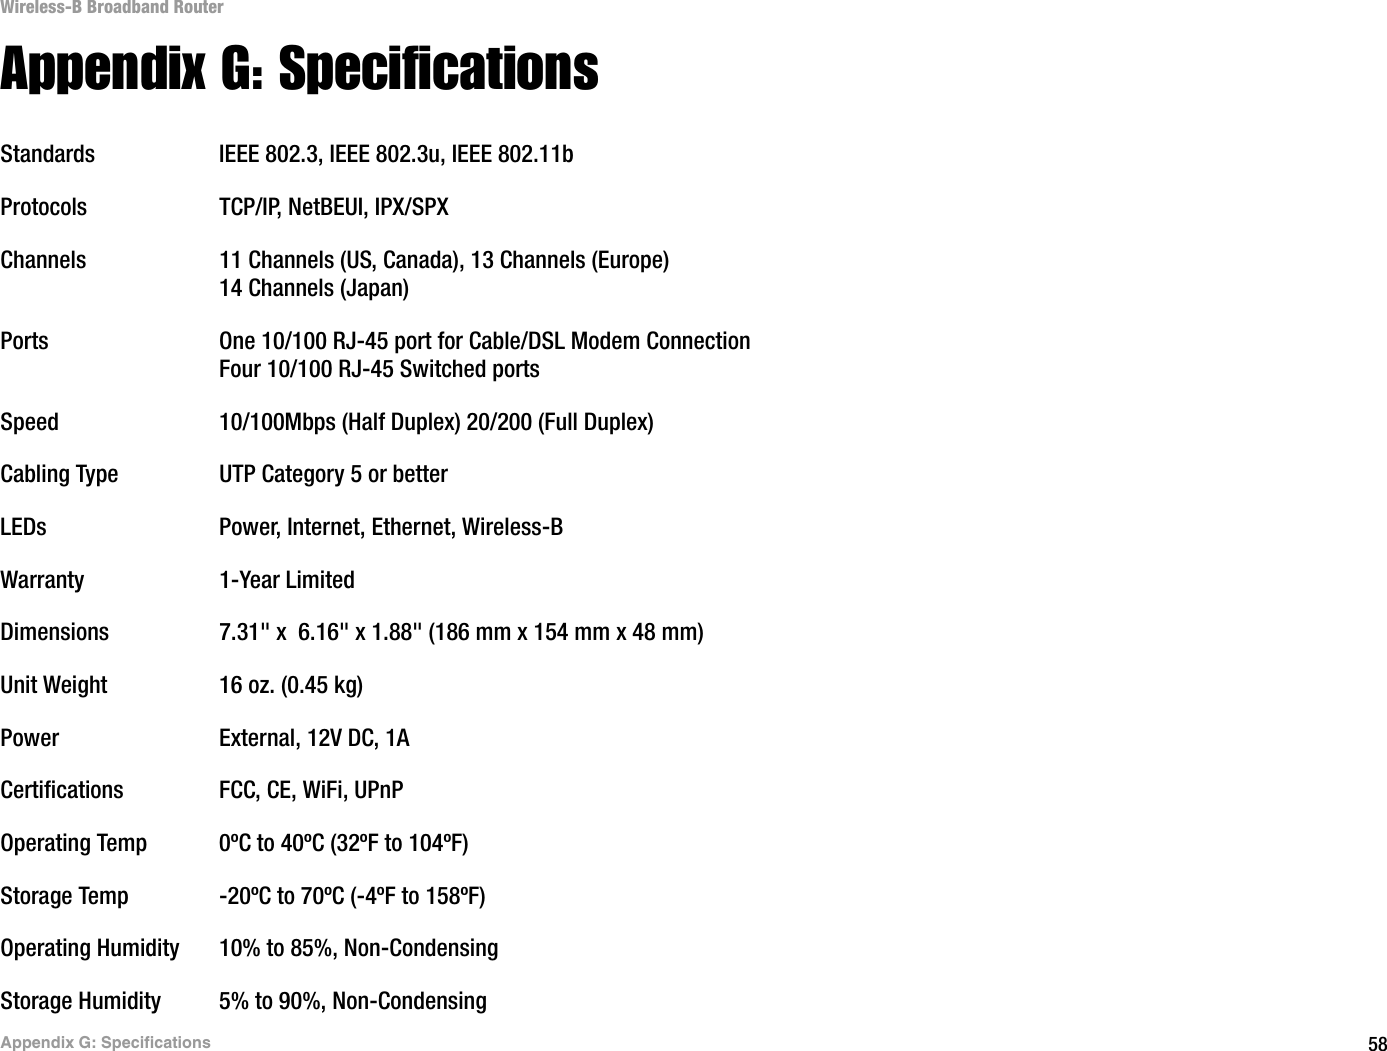 58Appendix G: SpecificationsWireless-B Broadband RouterAppendix G: SpecificationsStandards IEEE 802.3, IEEE 802.3u, IEEE 802.11bProtocols TCP/IP, NetBEUI, IPX/SPXChannels 11 Channels (US, Canada), 13 Channels (Europe)14 Channels (Japan)Ports One 10/100 RJ-45 port for Cable/DSL Modem ConnectionFour 10/100 RJ-45 Switched portsSpeed 10/100Mbps (Half Duplex) 20/200 (Full Duplex)Cabling Type UTP Category 5 or better LEDs Power, Internet, Ethernet, Wireless-BWarranty 1-Year LimitedDimensions 7.31&quot; x  6.16&quot; x 1.88&quot; (186 mm x 154 mm x 48 mm)Unit Weight 16 oz. (0.45 kg)Power External, 12V DC, 1ACertifications FCC, CE, WiFi, UPnPOperating Temp 0ºC to 40ºC (32ºF to 104ºF) Storage Temp -20ºC to 70ºC (-4ºF to 158ºF)Operating Humidity 10% to 85%, Non-CondensingStorage Humidity 5% to 90%, Non-Condensing